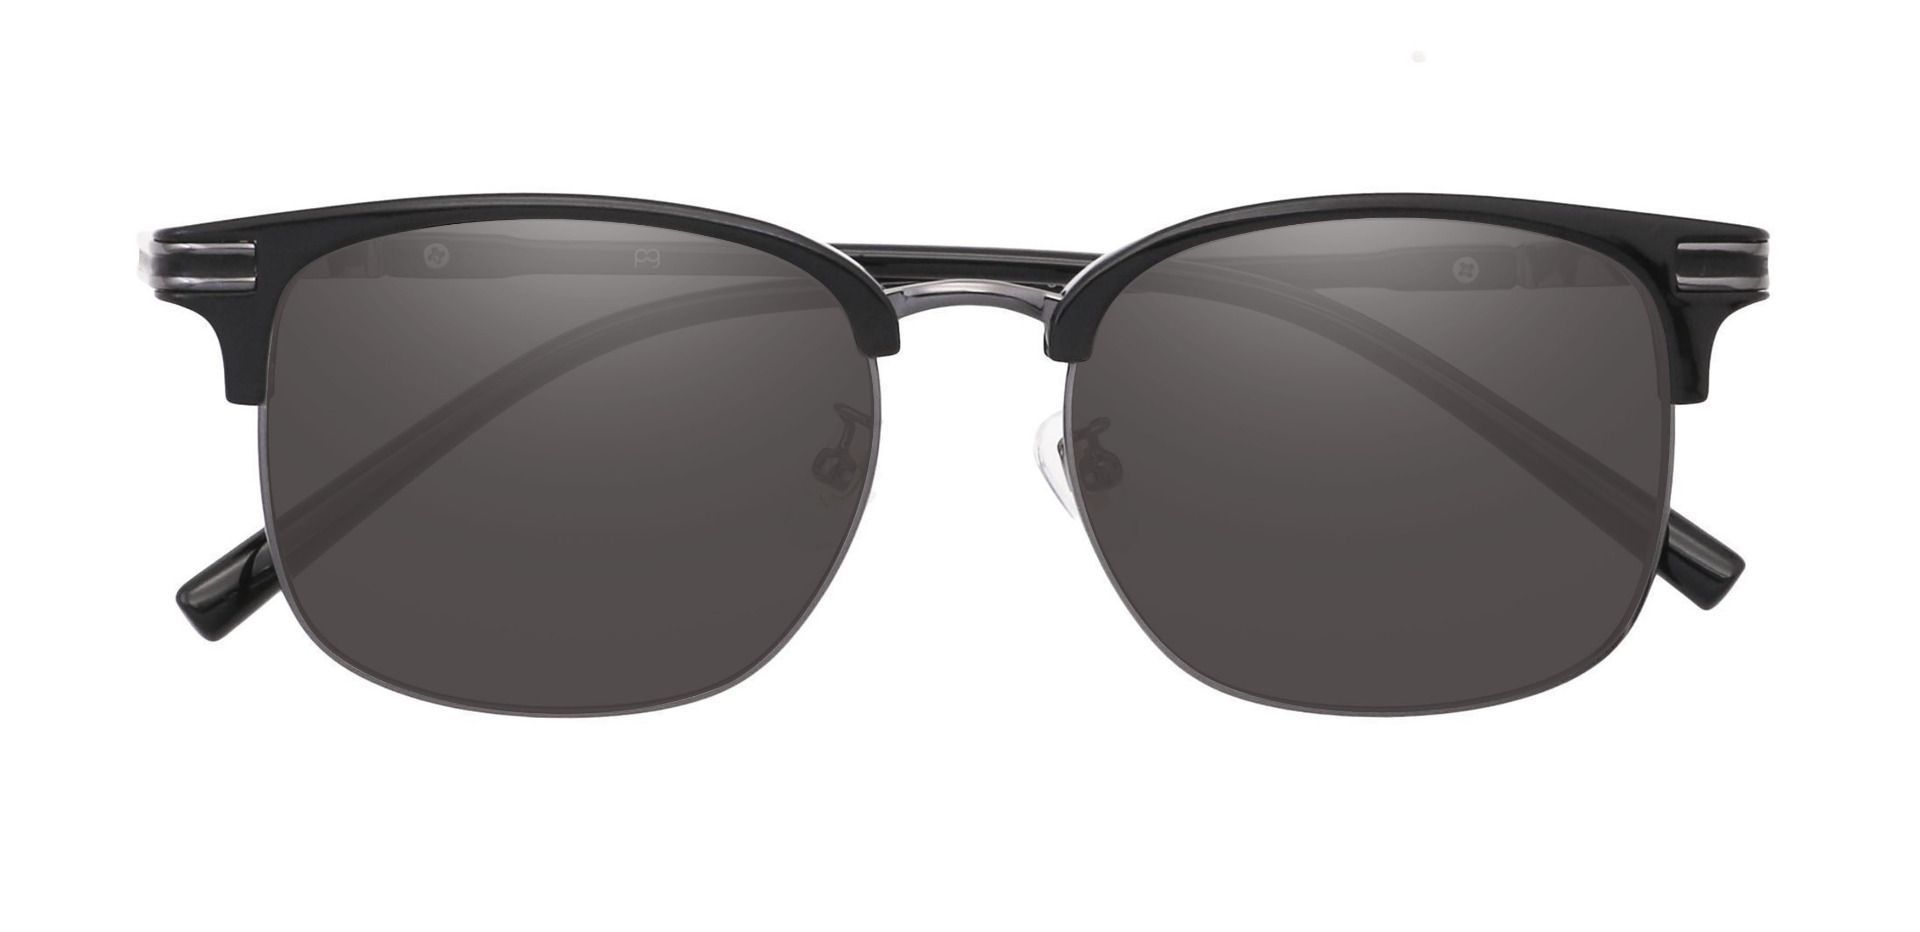 Cafe Browline Non-Rx Sunglasses - Black Frame With Gray Lenses